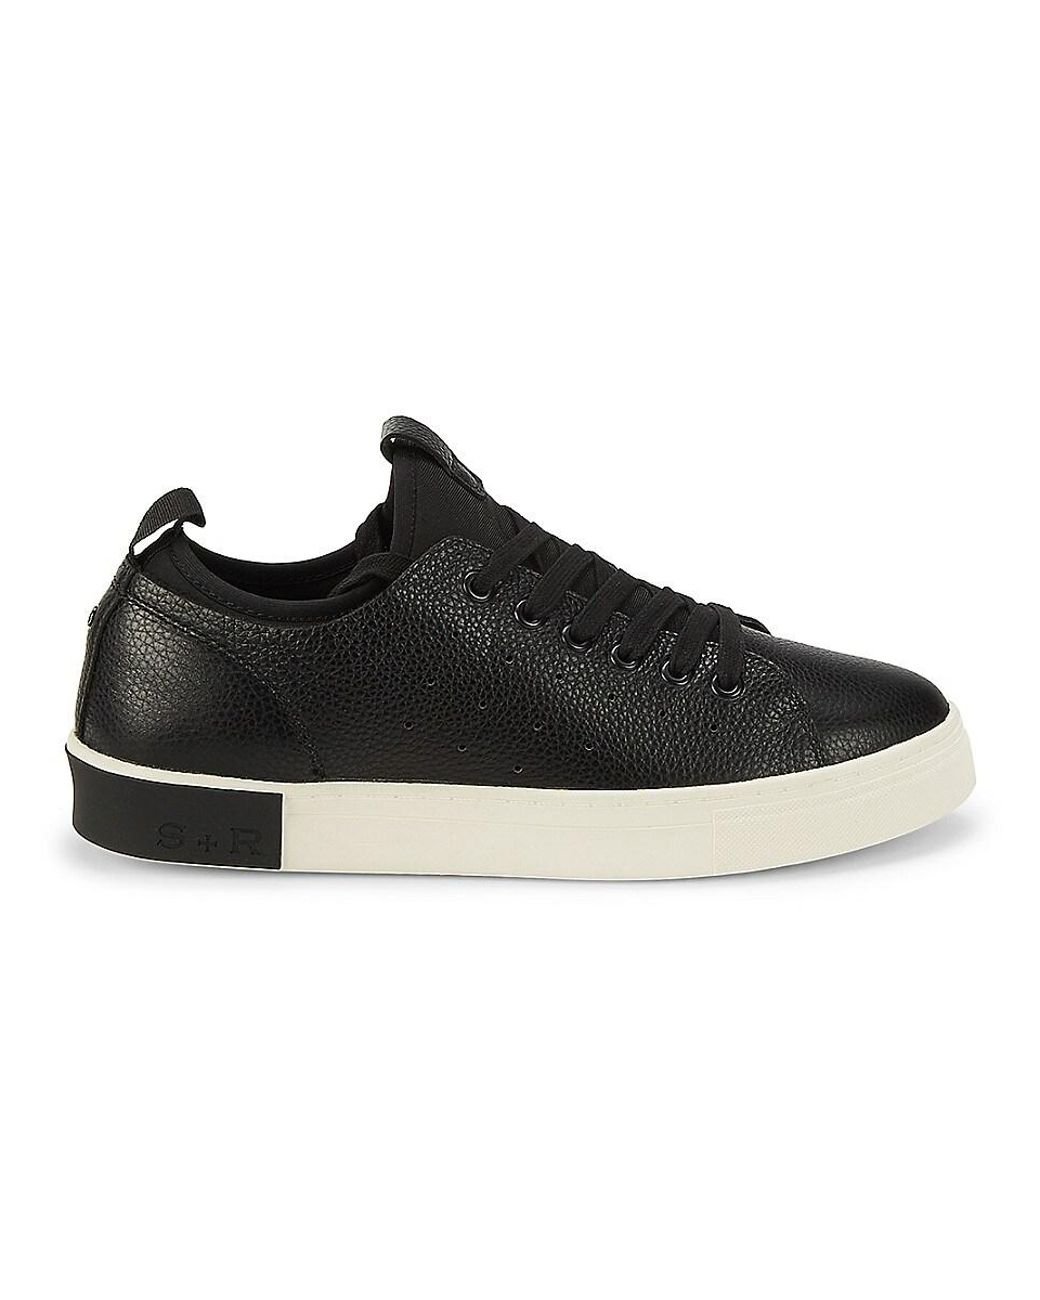 STRAUSS + RAMM Strauss + Ramm Leather Sneakers in Black for Men | Lyst